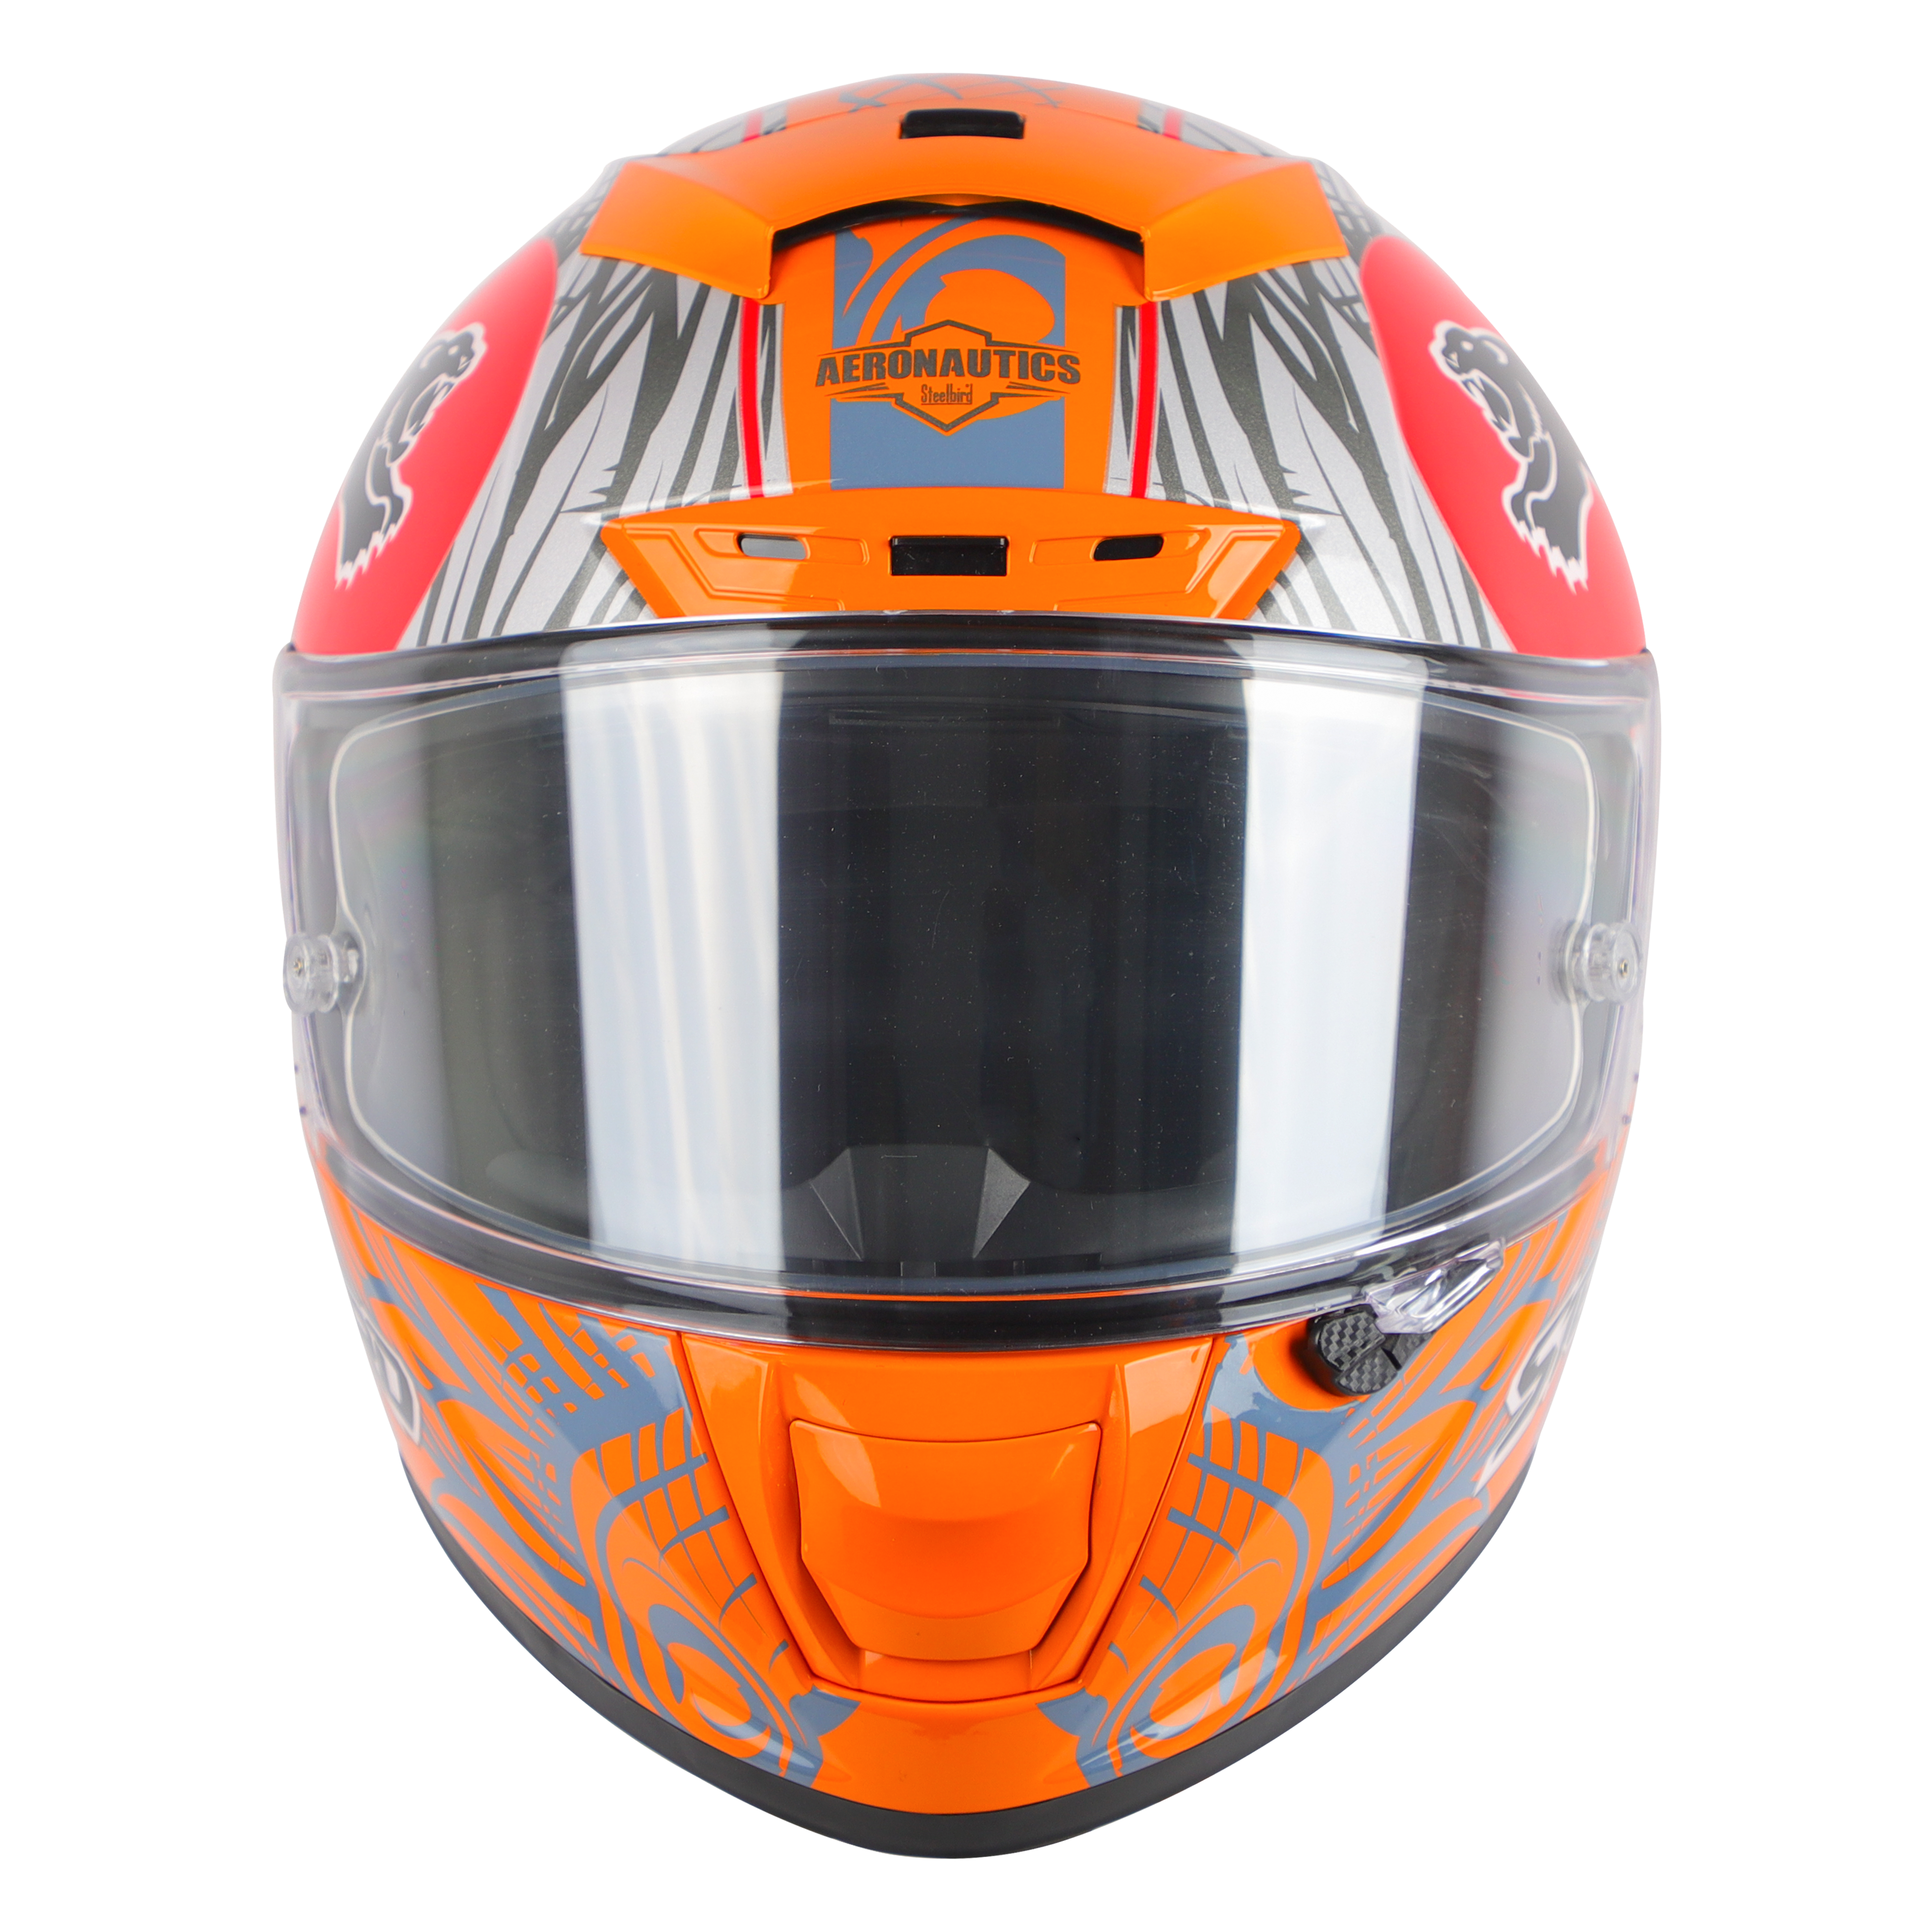 SA-5 DOT FLYDECK GLOSSY ORANGE WITH RED (WITH ANTI-FOG SHIELD VISOR) 